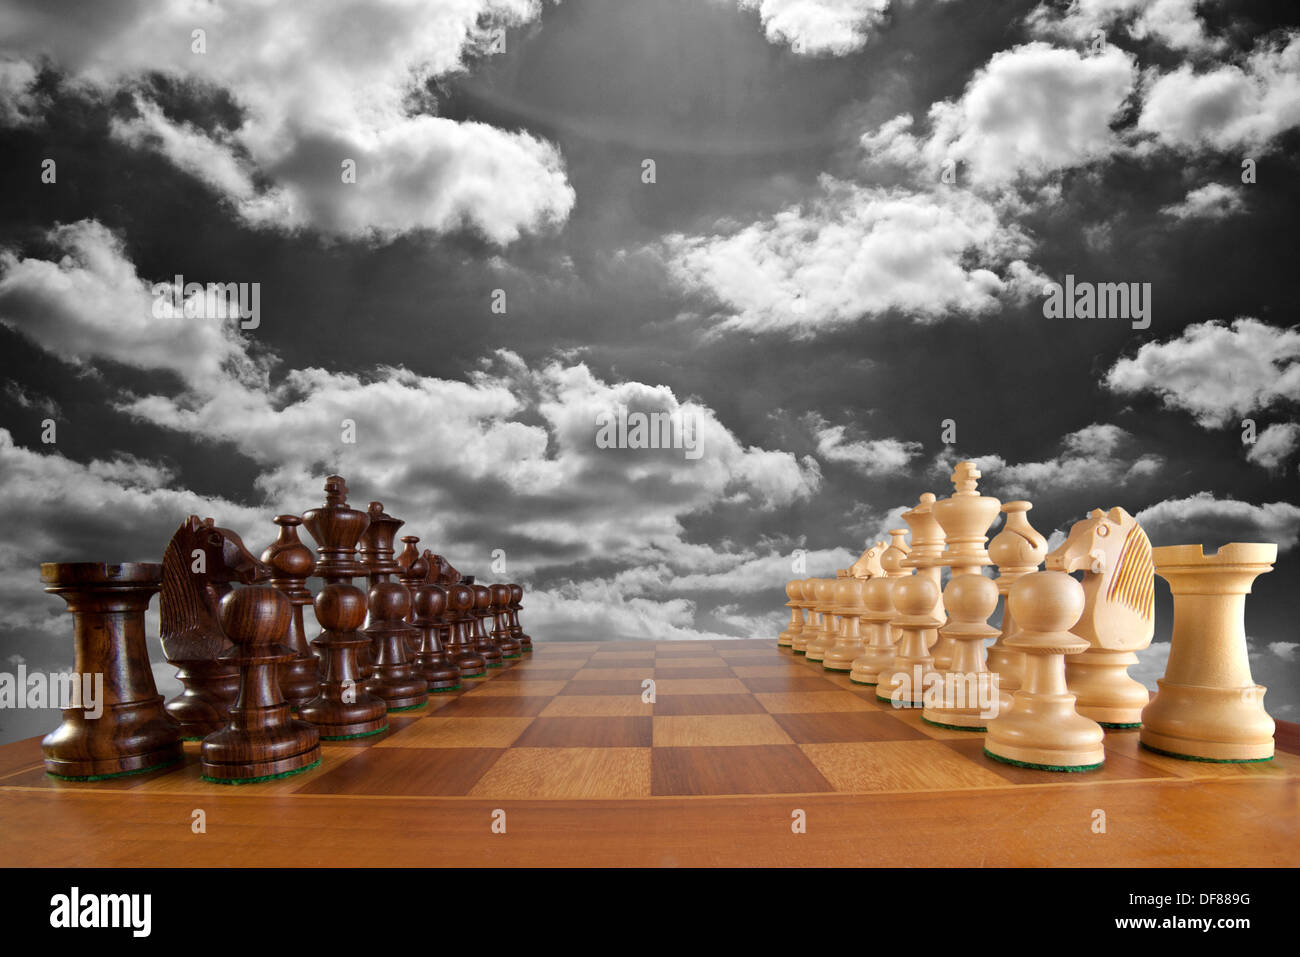 alert,attention,anticipate, analise,analize,achieve,Carlsen, So, Ivanchuk, Kasparov, Karpov, Fischer, Botvinnik, Capablanca, Lasker, Korchnoi, Spassky, Chess set pieces game panorama distorted, Giant, Chess, pieces, Game, Abstract concept special effects, strategy, theory, rational, study, mathematical, model, Magnus Carlsen,Ian Nepomniachtchi,Dubai, Stock Photo